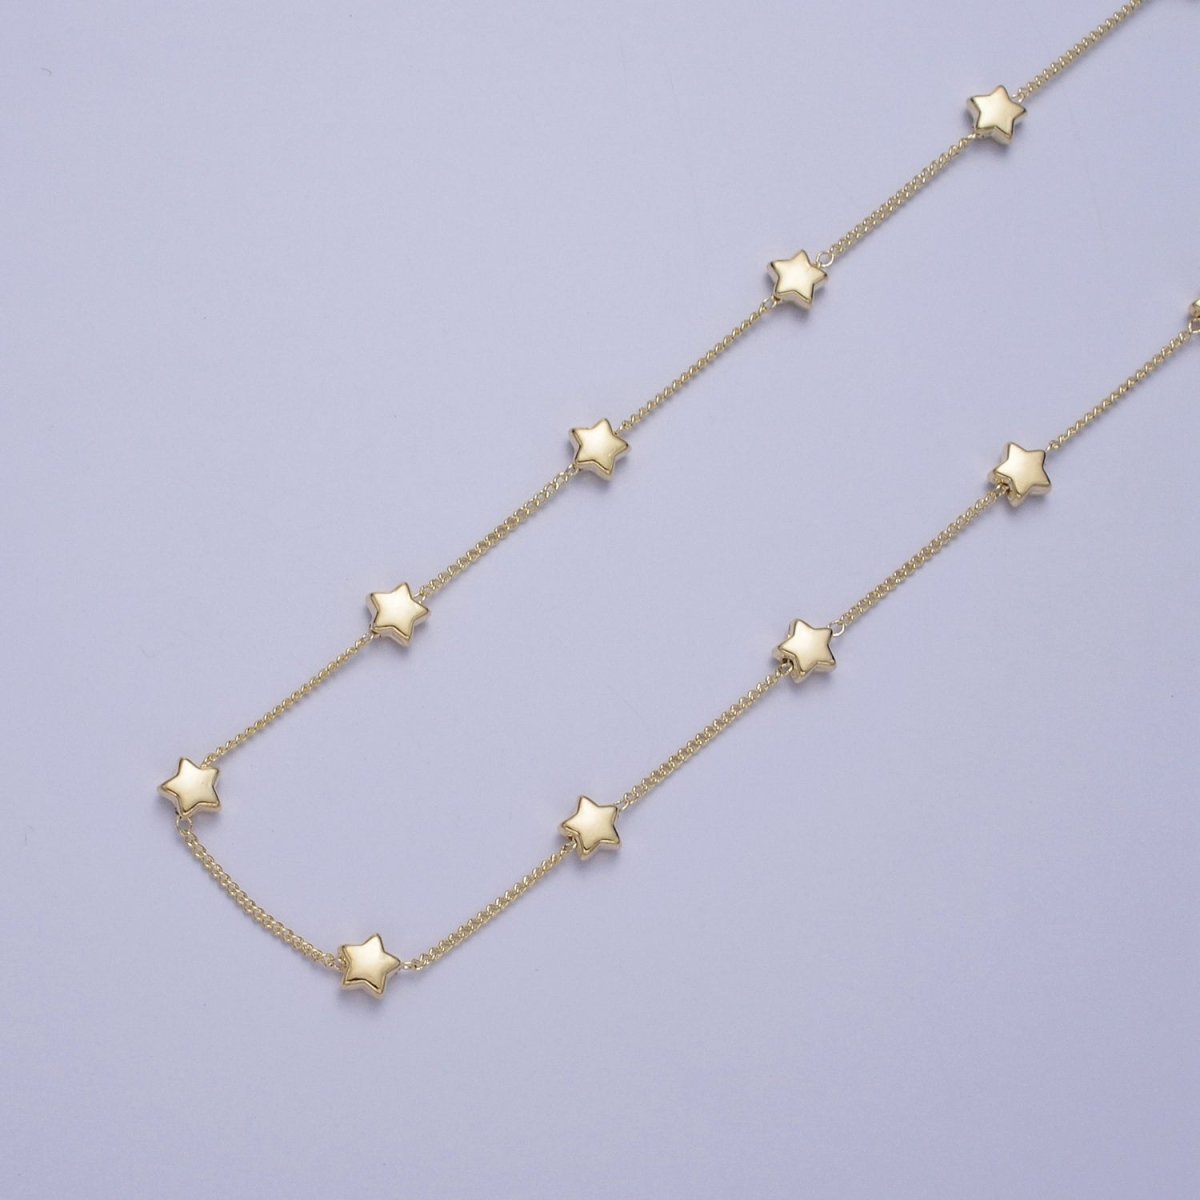 Gold Satellite Star Bead Chain Wholesale by Yard For Celestial Jewelry Component | ROLL-837 Clearance Pricing - DLUXCA